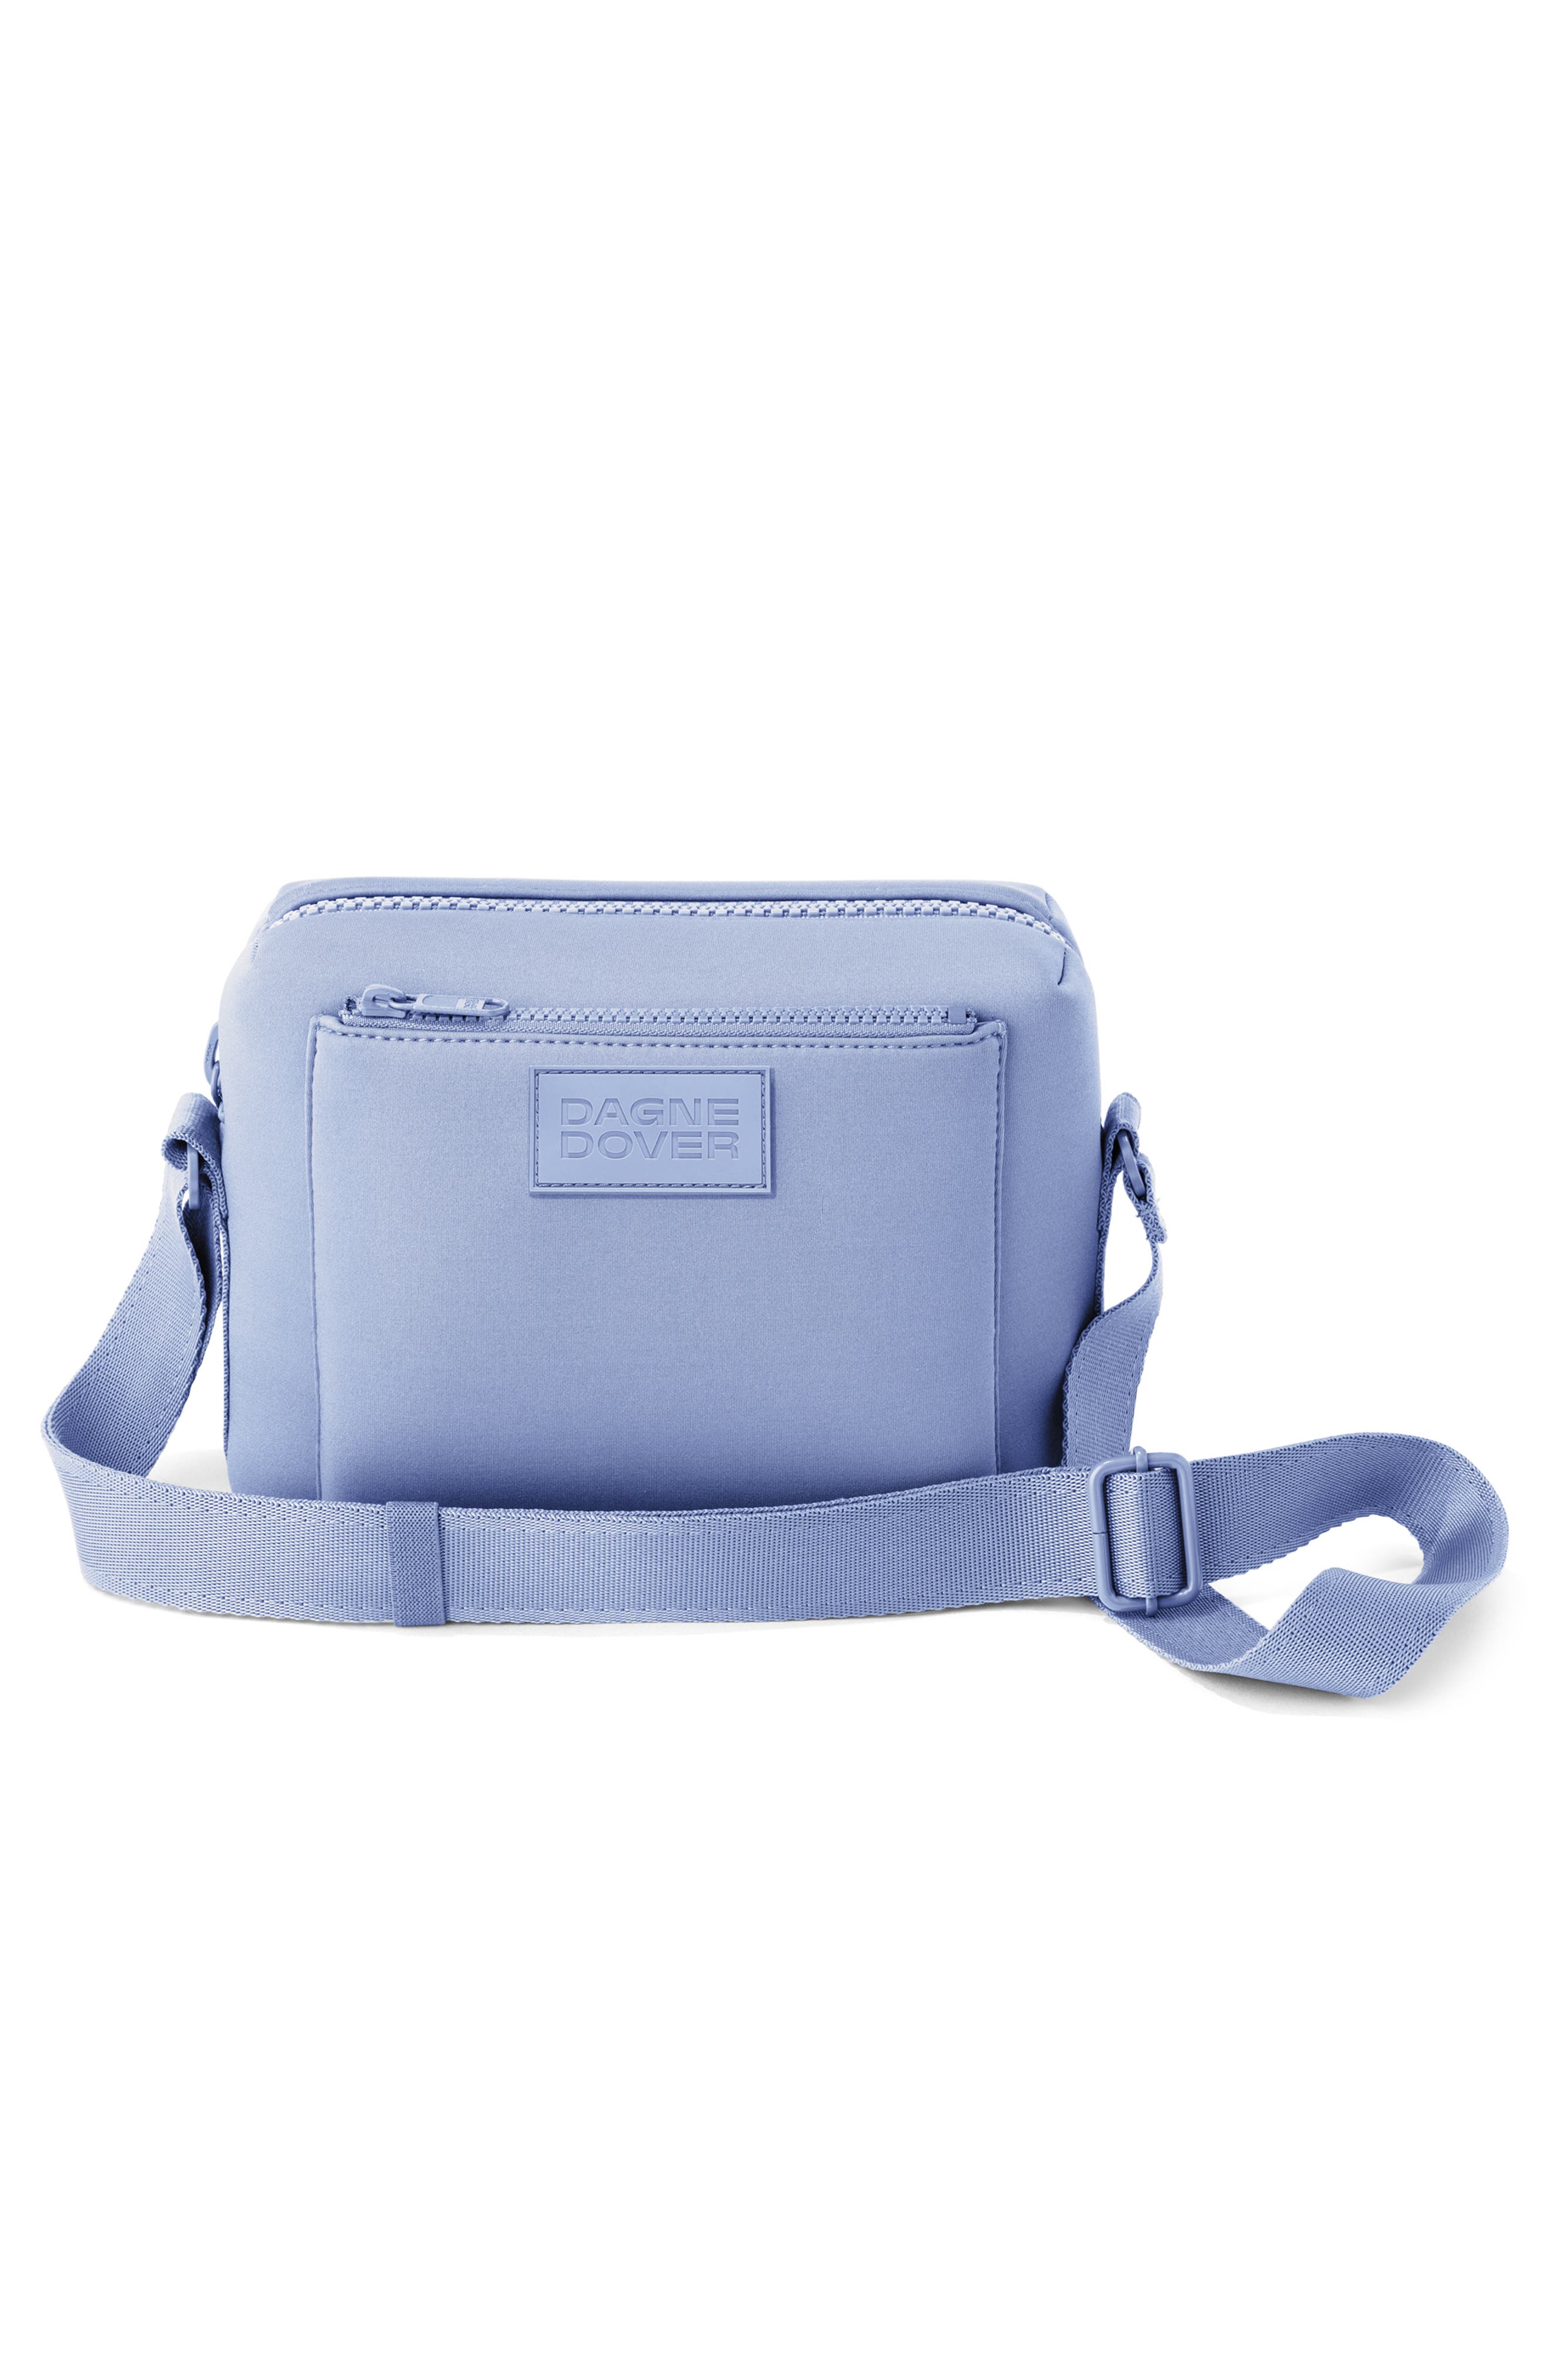 The Dagne Dover Mara Sling Will Help You Never Forget Your Essentials Again